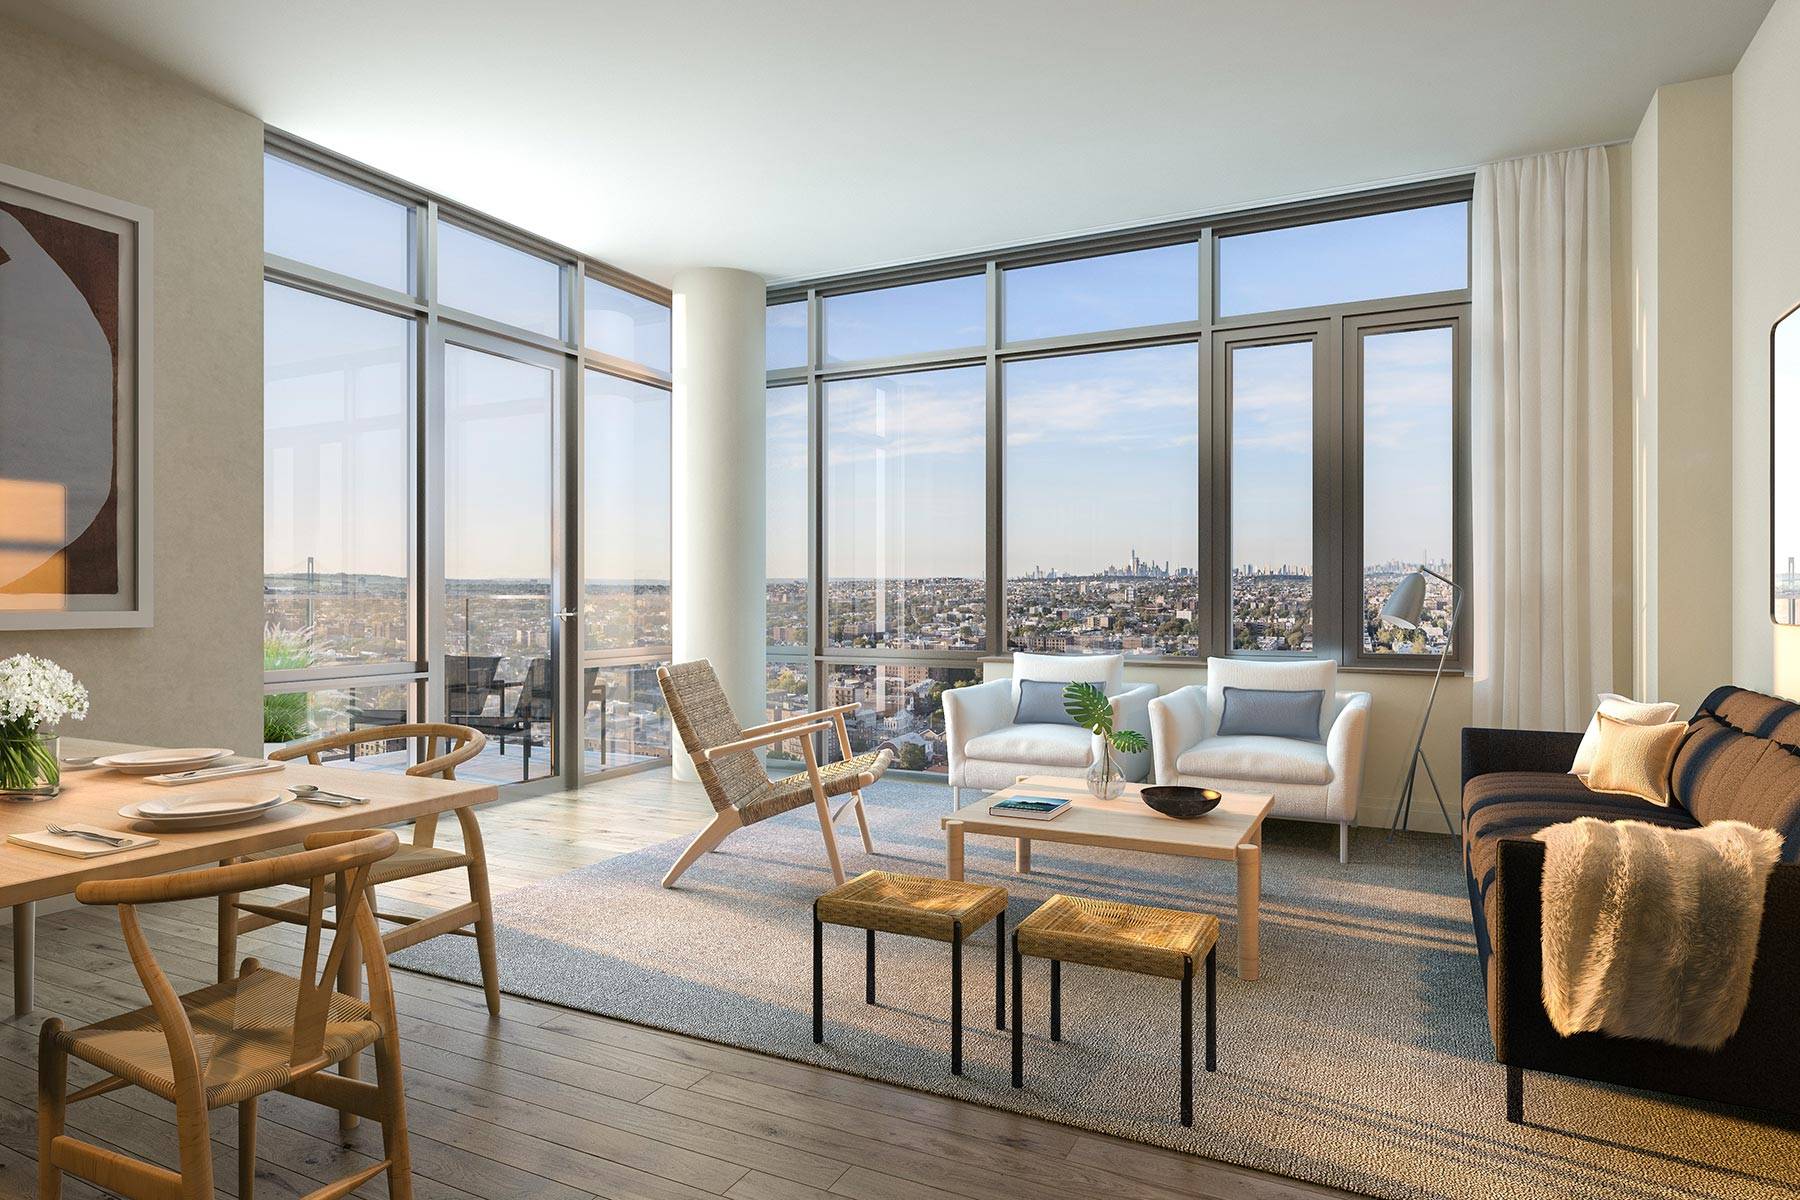 Brooklyn Bay delivers a lifestyle of superior quality and leisure, offering residents a standard of comfort and convenience unmatched in Brooklyn.